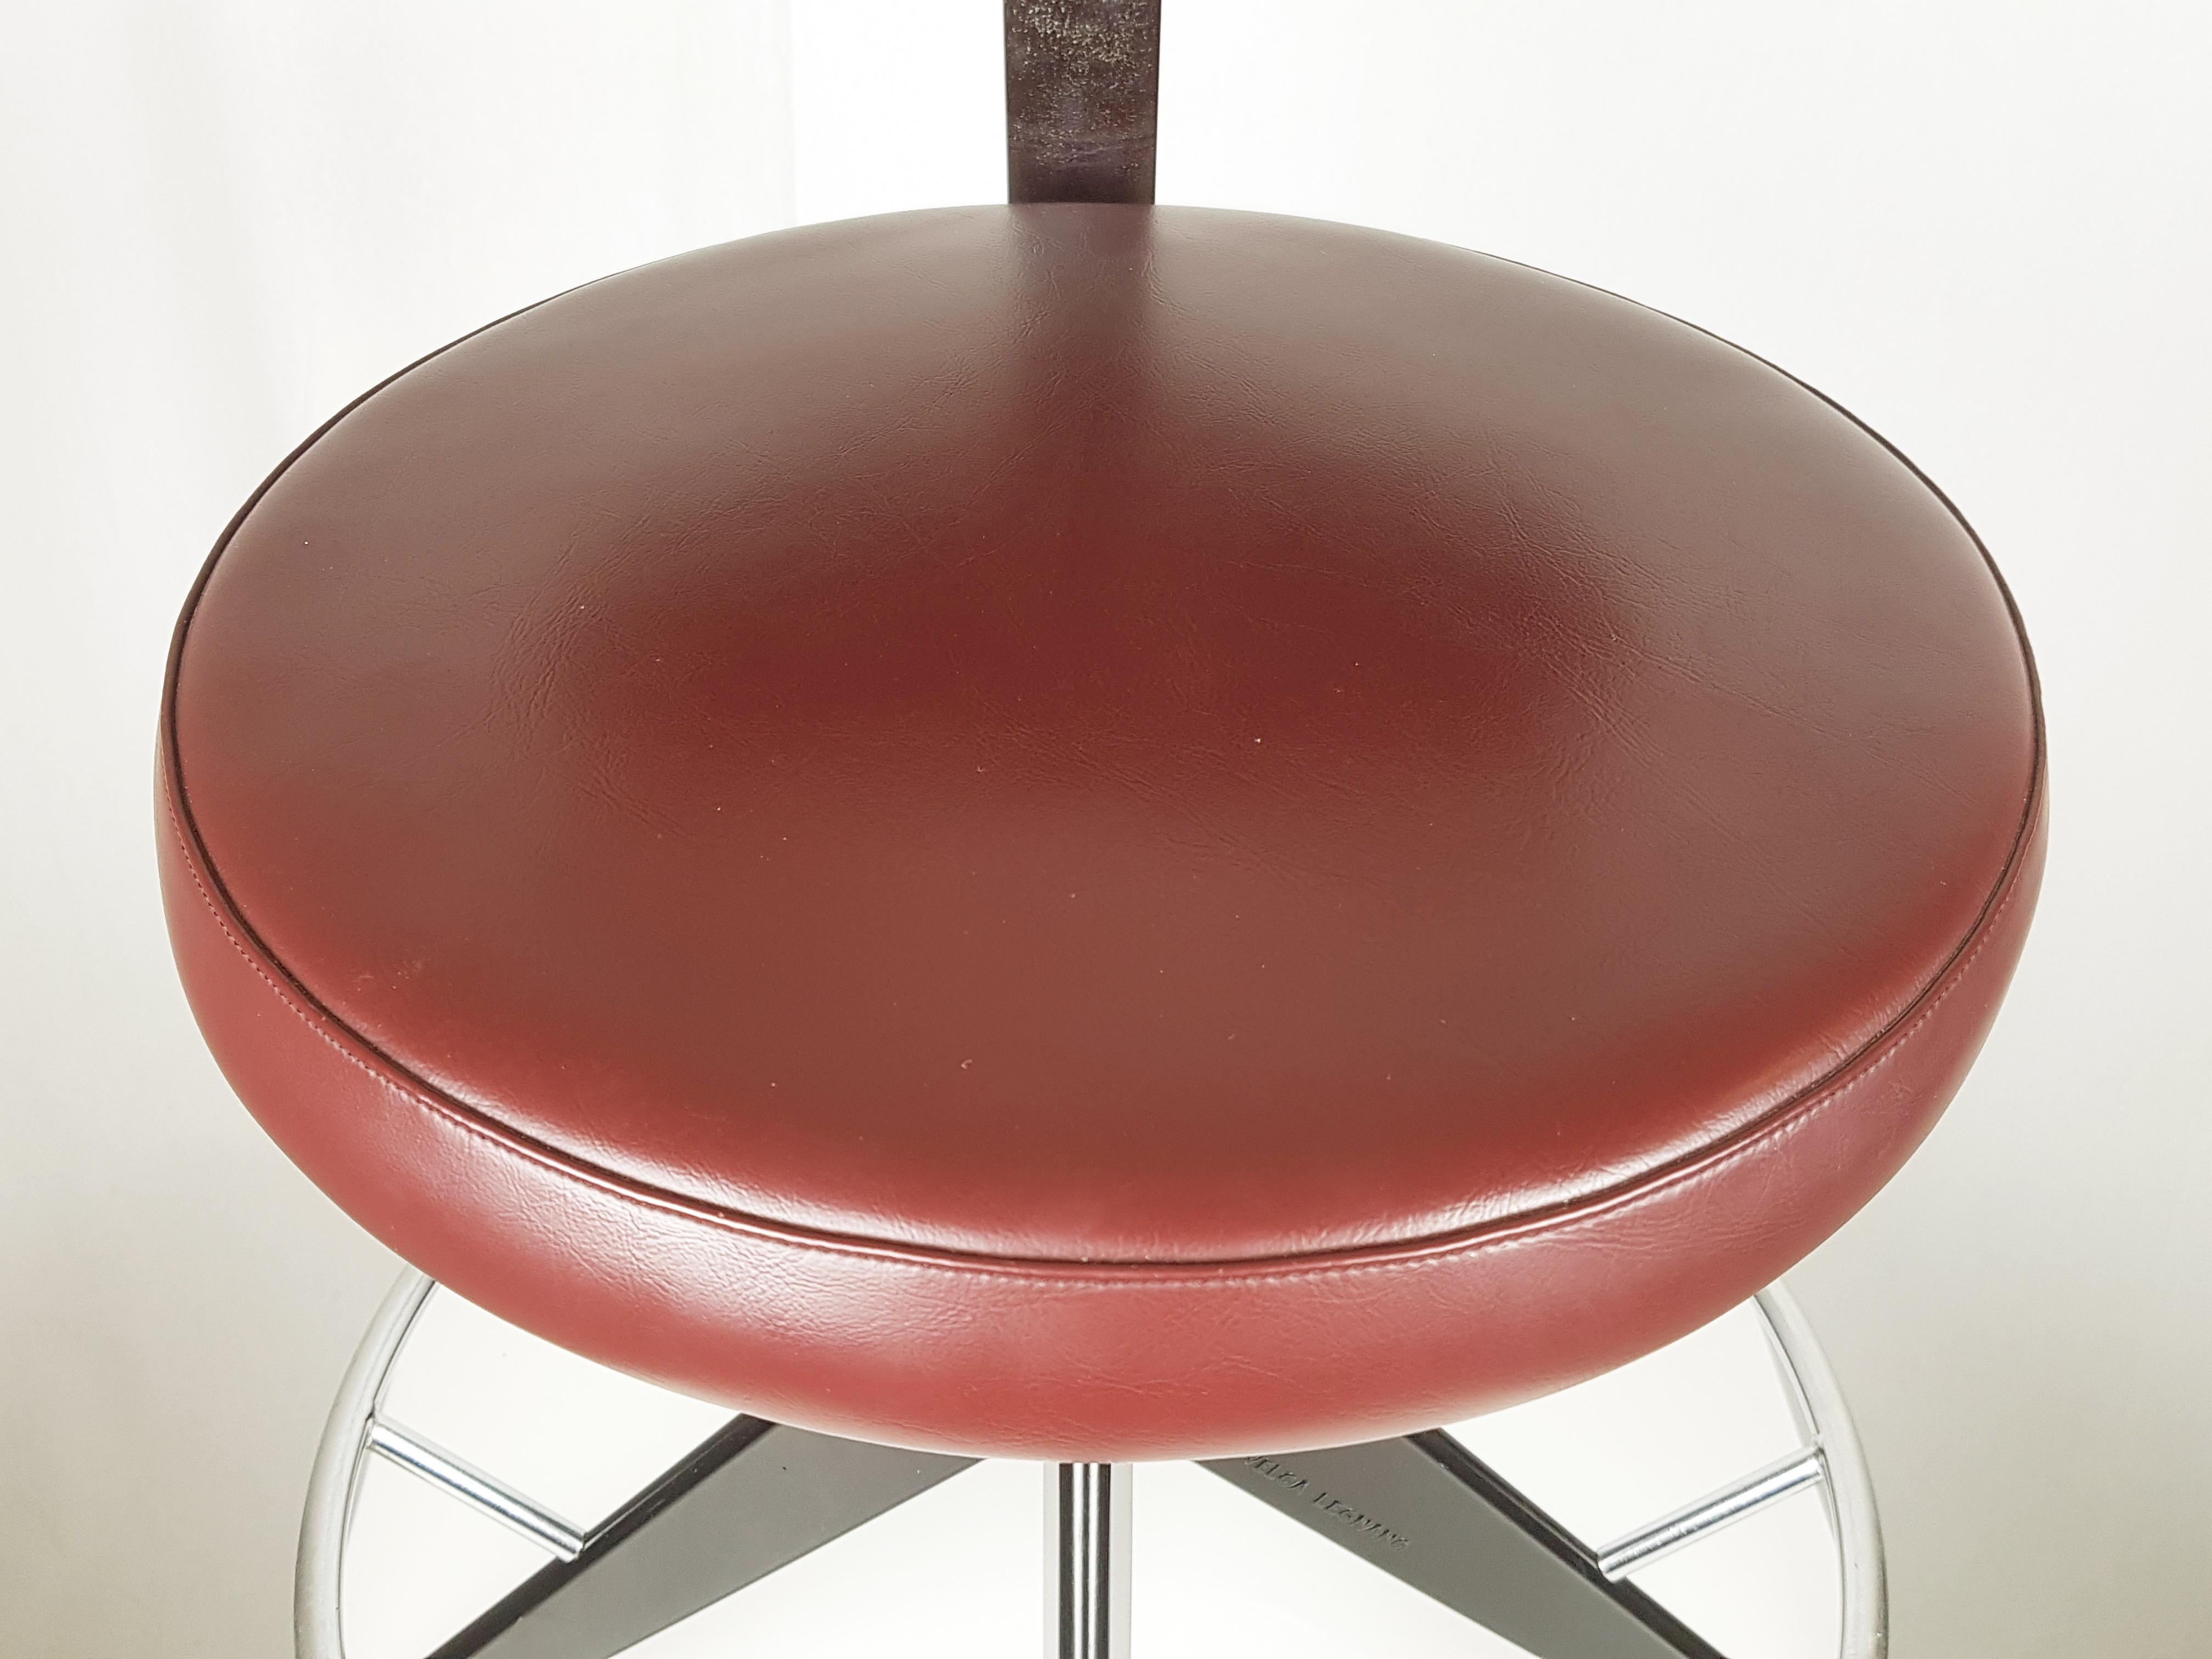 Chrome Plated & Black Metal Burgundy Skay 1960/70s Stools by Velca For Sale 7